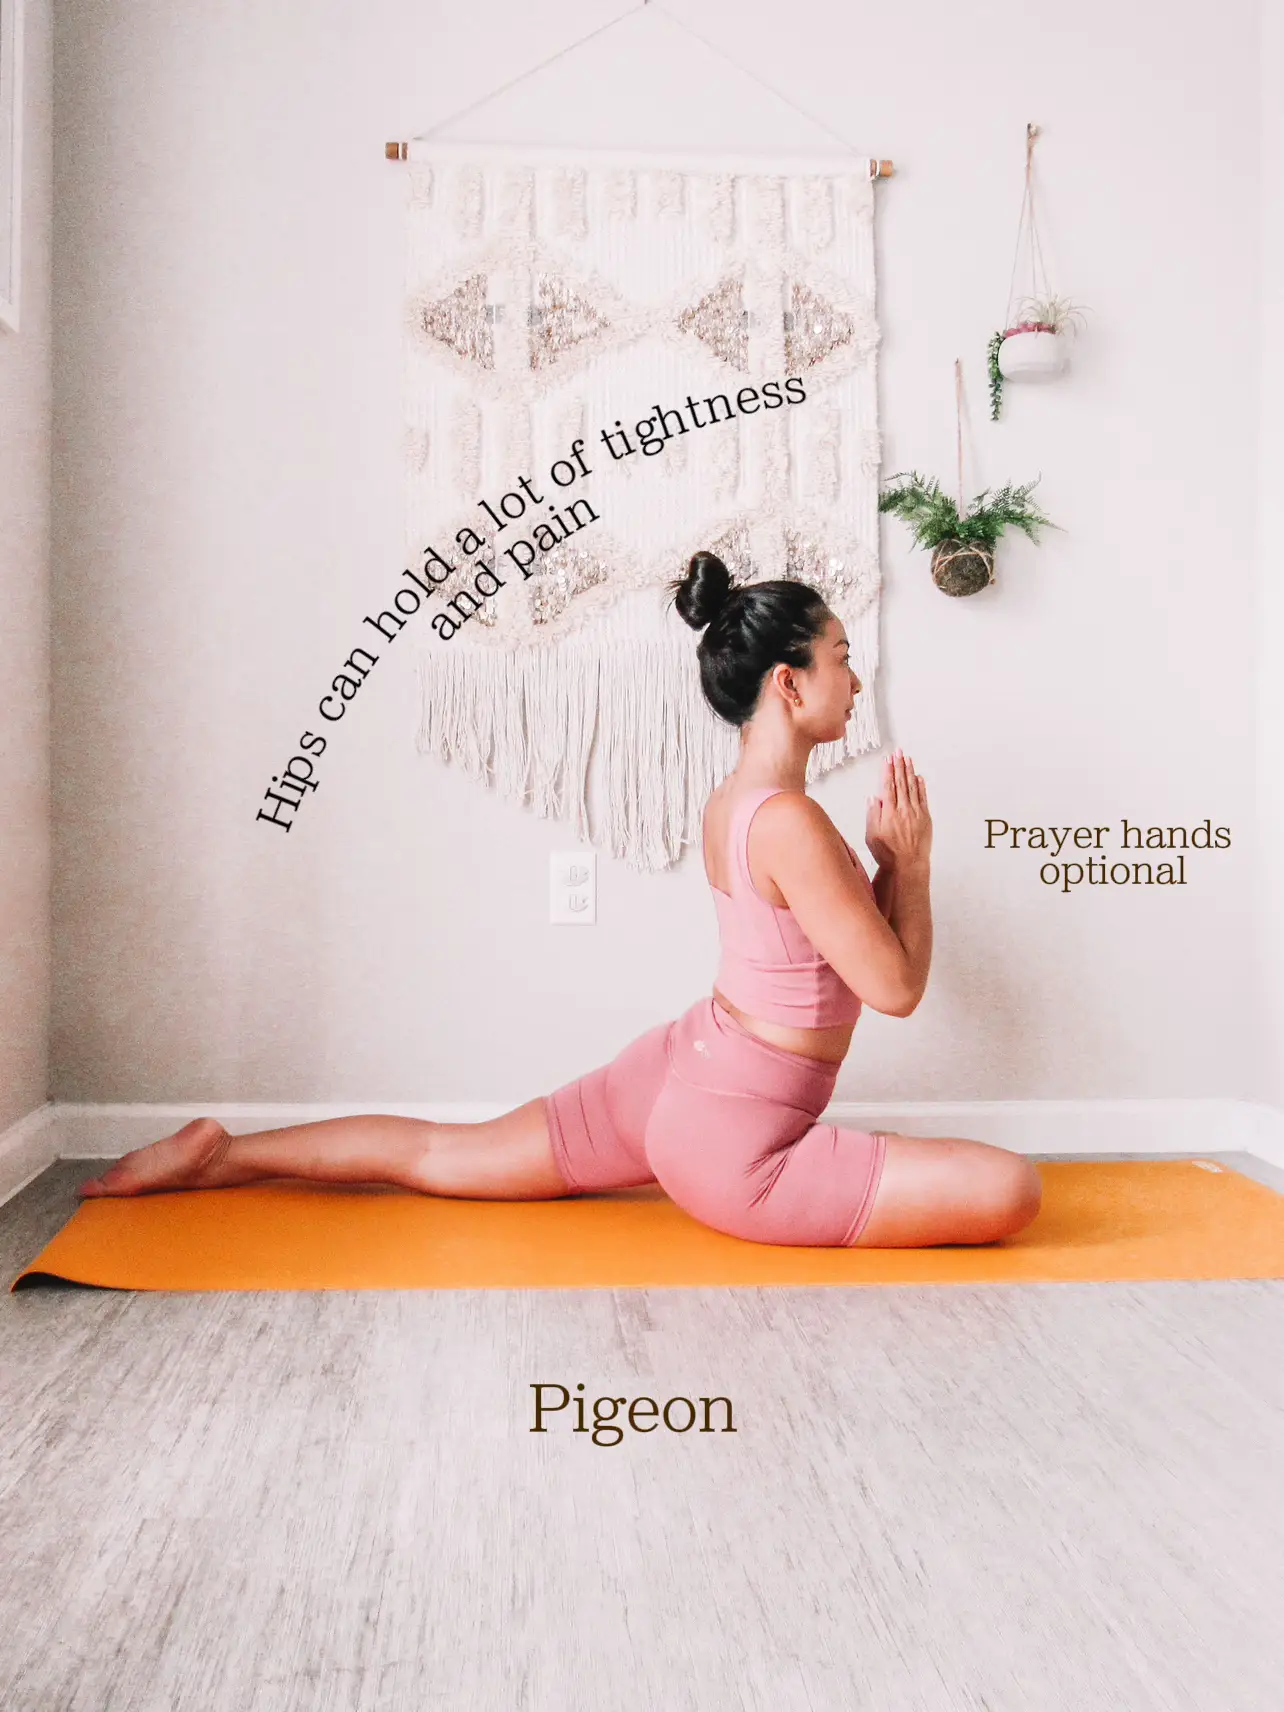 Stretch your spine, Gallery posted by yogawithrona